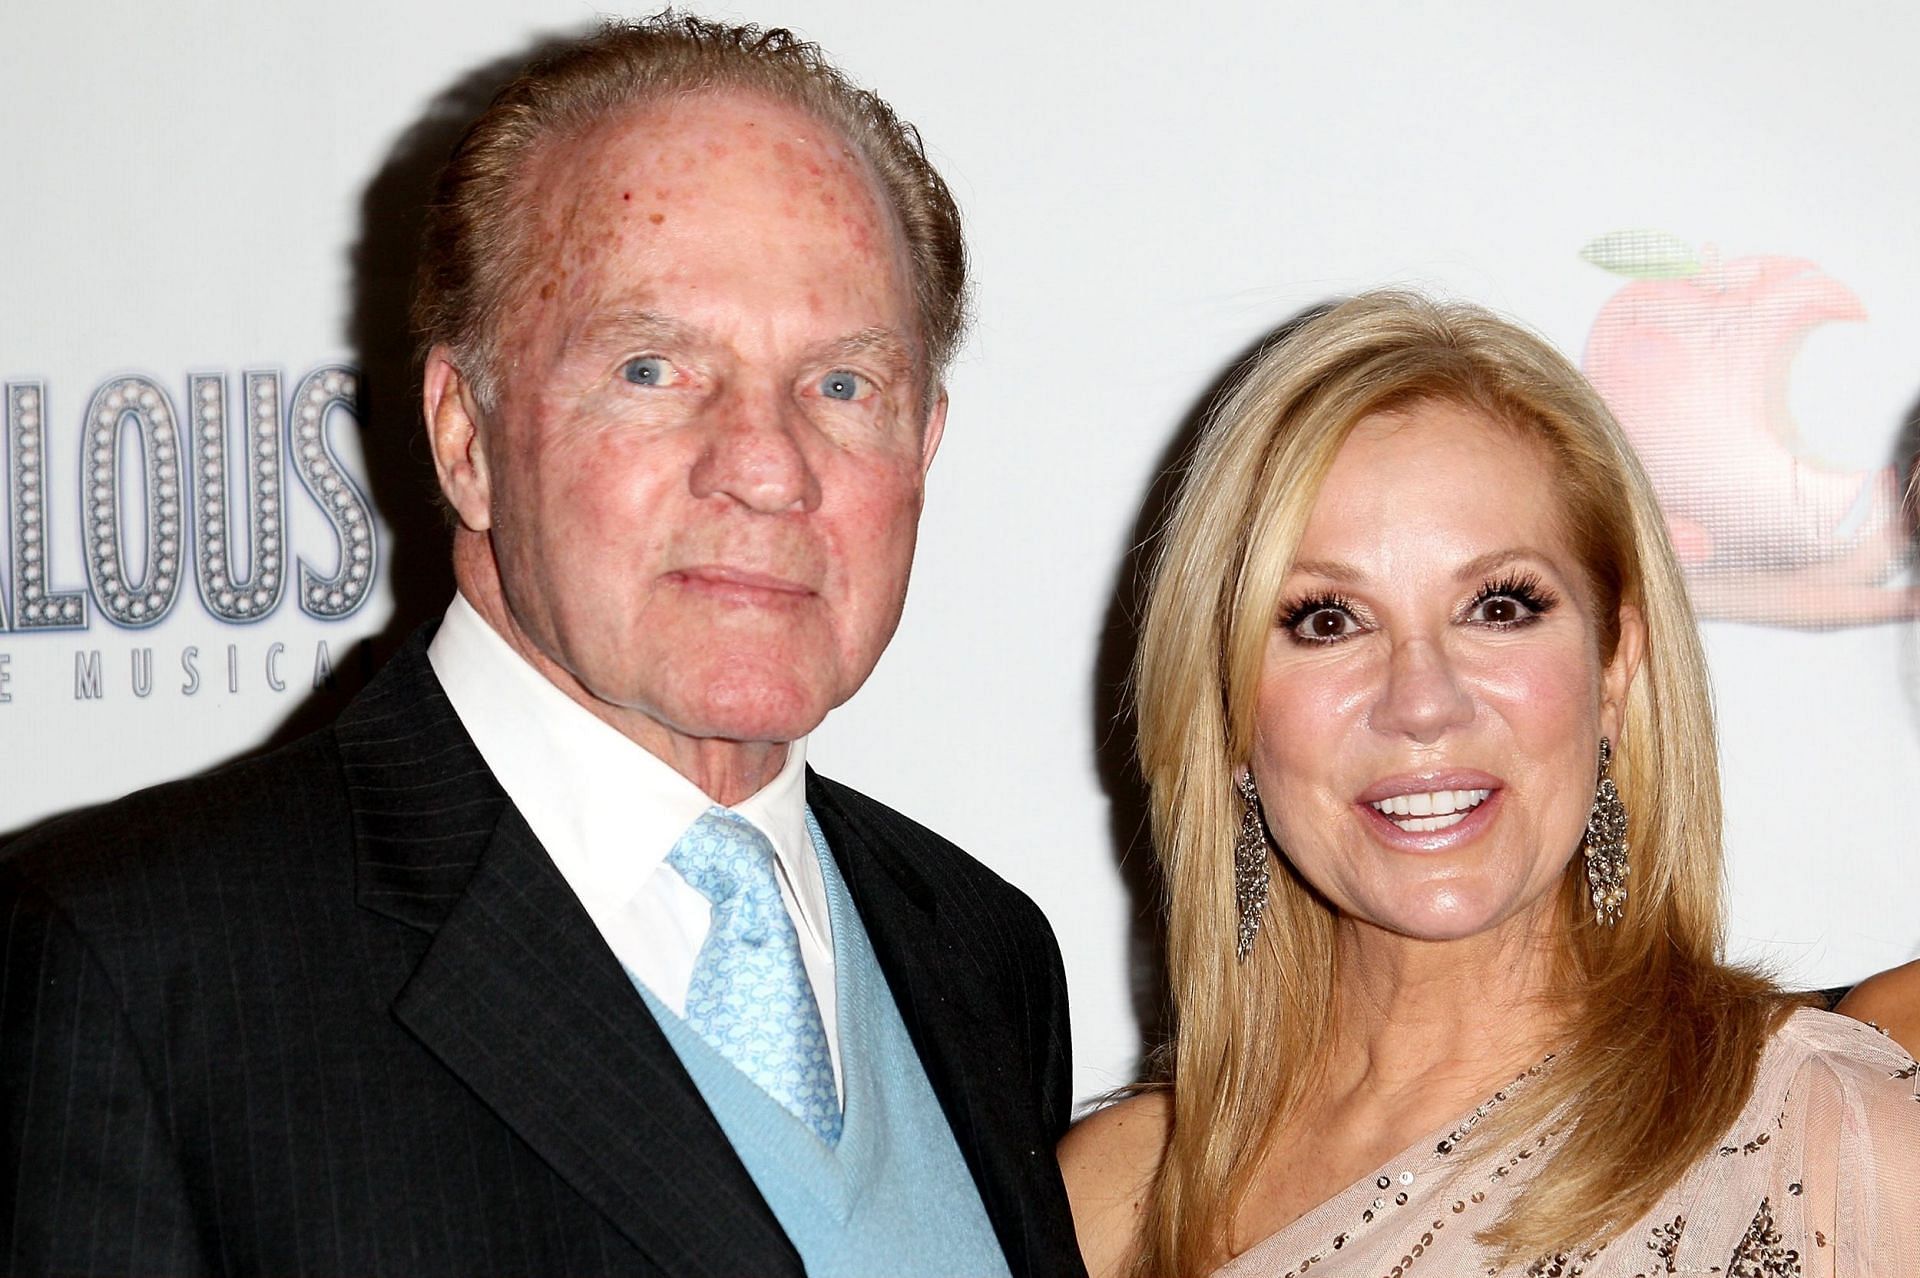 Frank Gifford and his wife Kathie Lee in their later stages